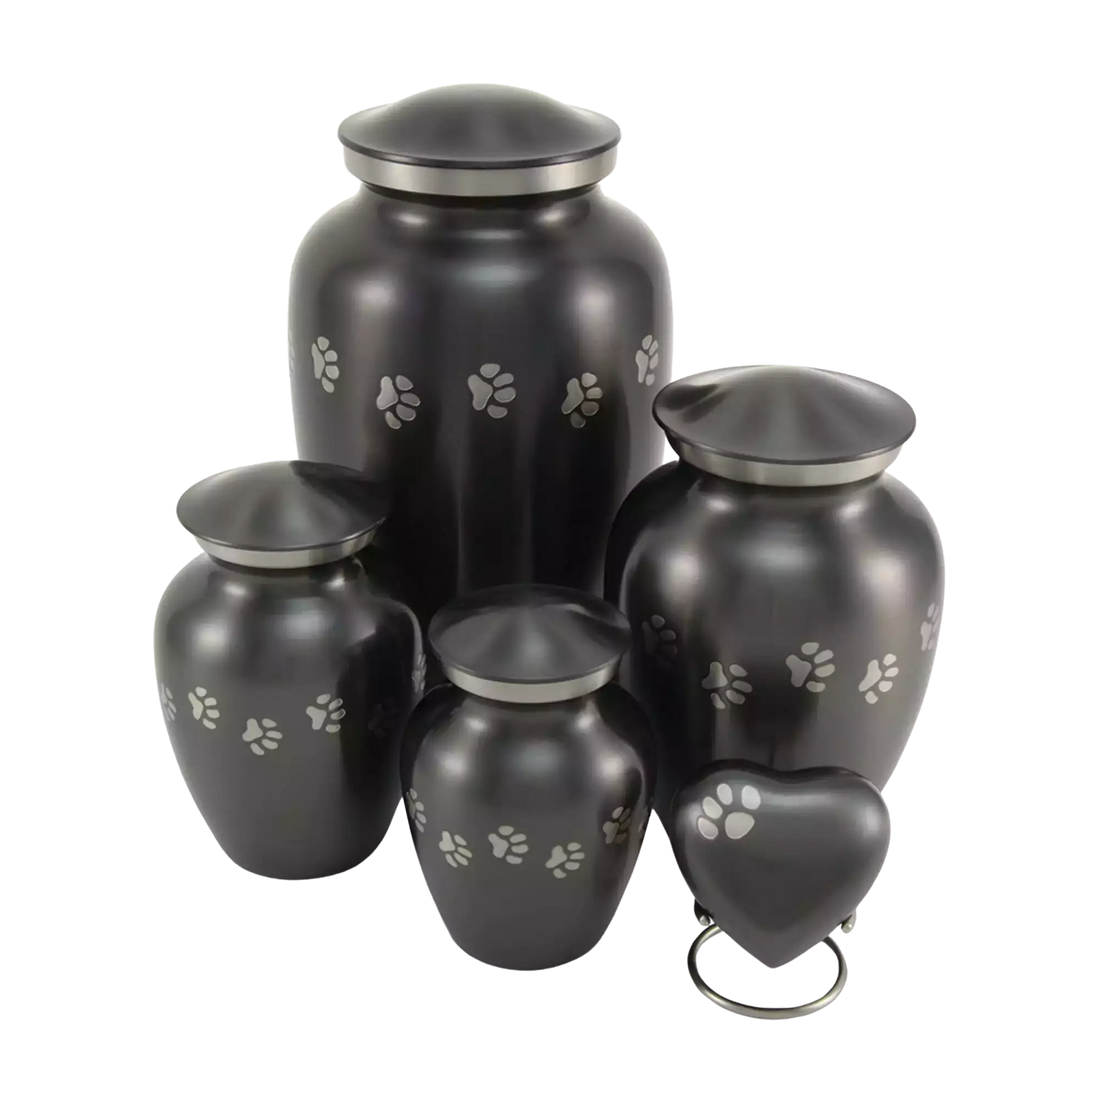 Pet Cremation Urns with Angel Cat or Dog Figurines: Symbolizing Protection and Guidance